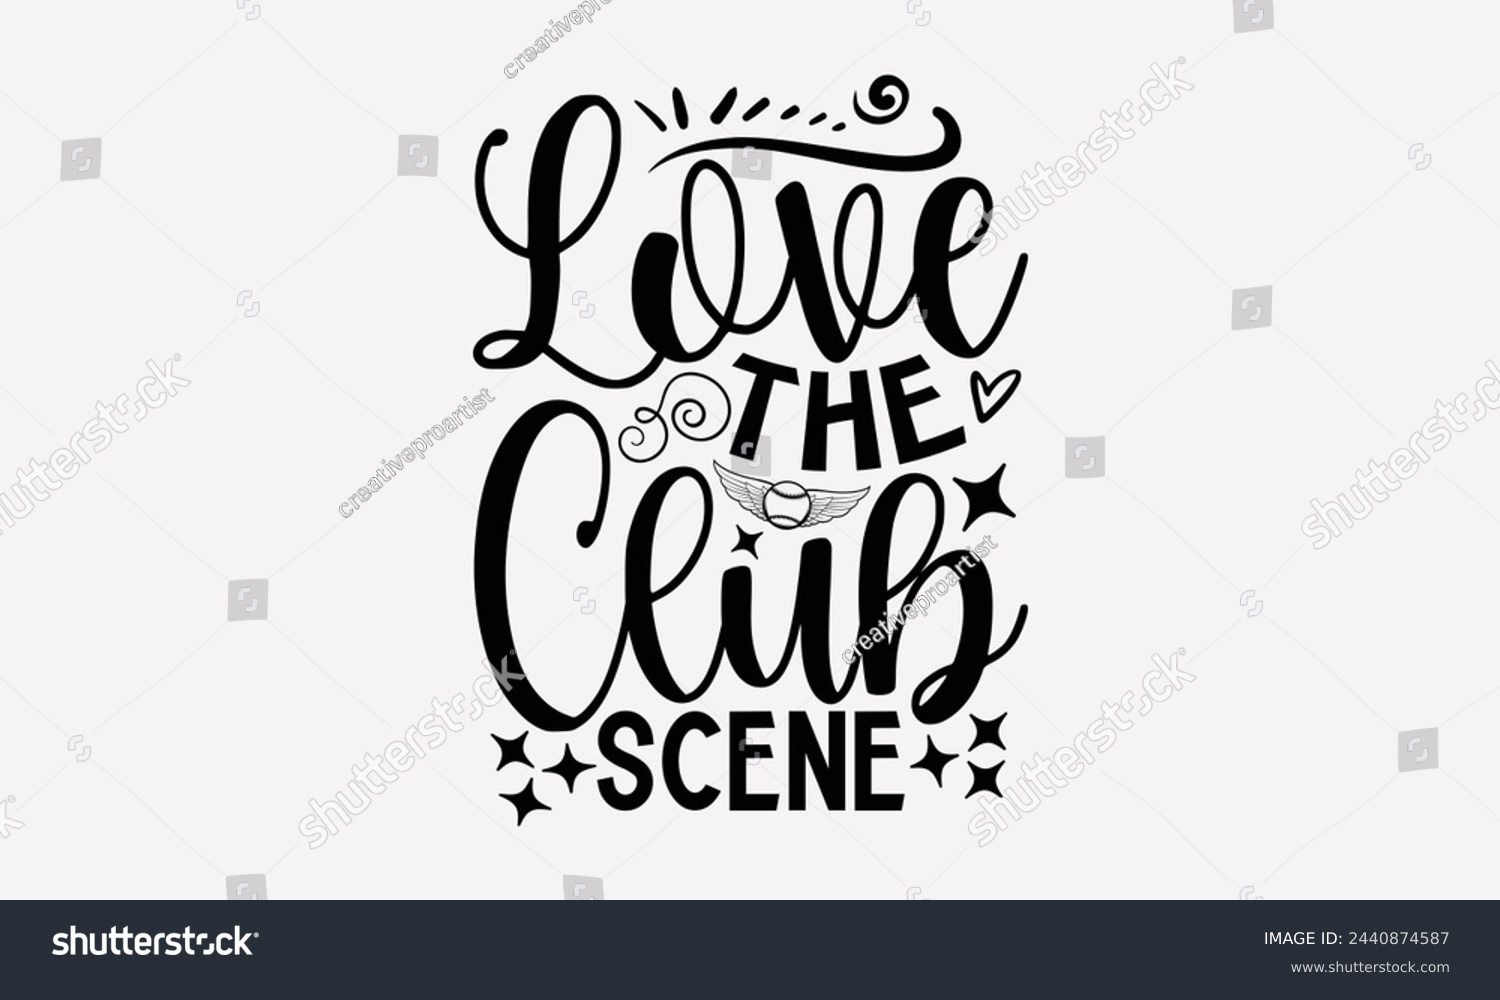 SVG of Love The Club Scene- Golf t- shirt design, Hand drawn lettering phrase isolated on white background, for Cutting Machine, Silhouette Cameo, Cricut, greeting card template with typography text svg